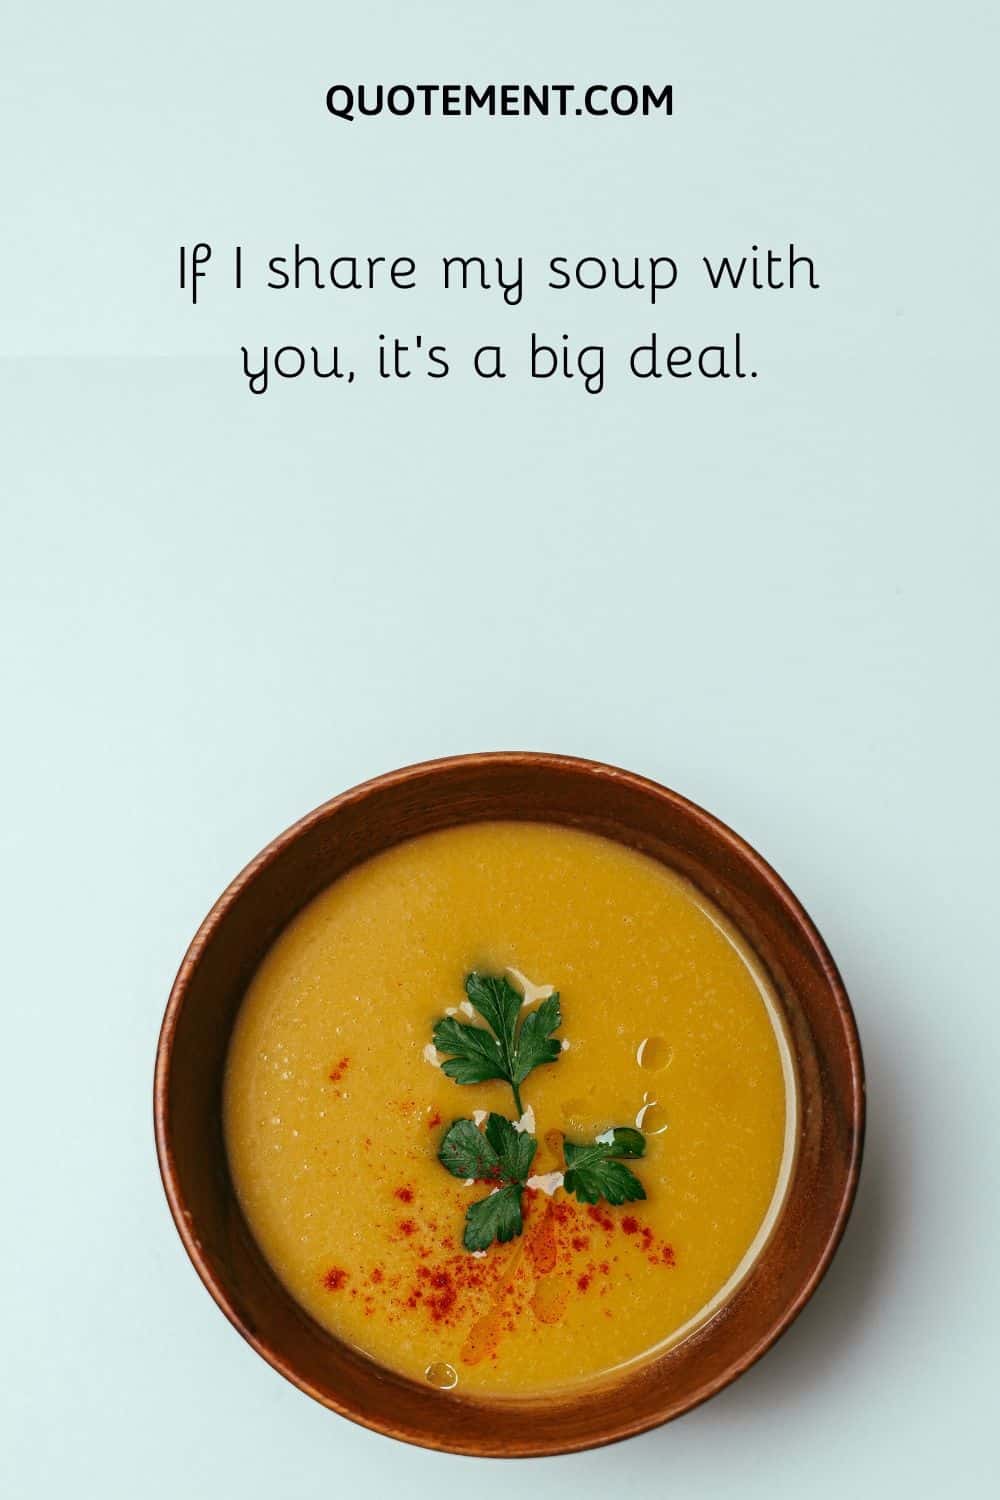 If I share my soup with you, it’s a big deal